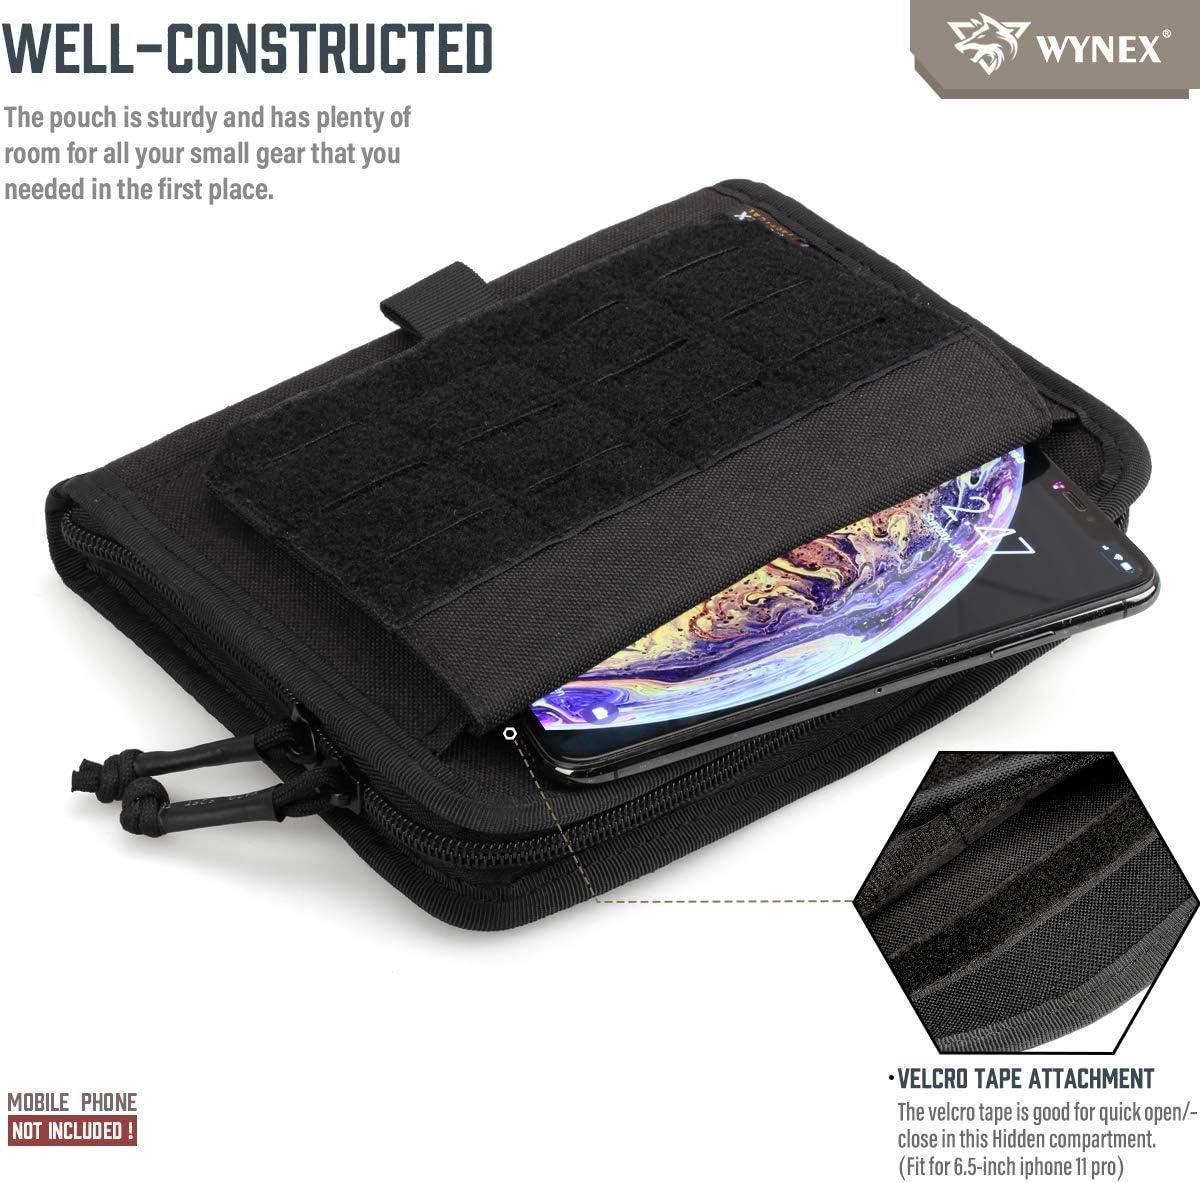 Wholesale WYNEX Tactical Folding Admin Pouch, Molle Tool Bag of Laser-Cut  Design, Utility Organizer EDC Medical Bag Modular Pouches Tactical  Attachment Waist Pouch Include U.S Patch Black